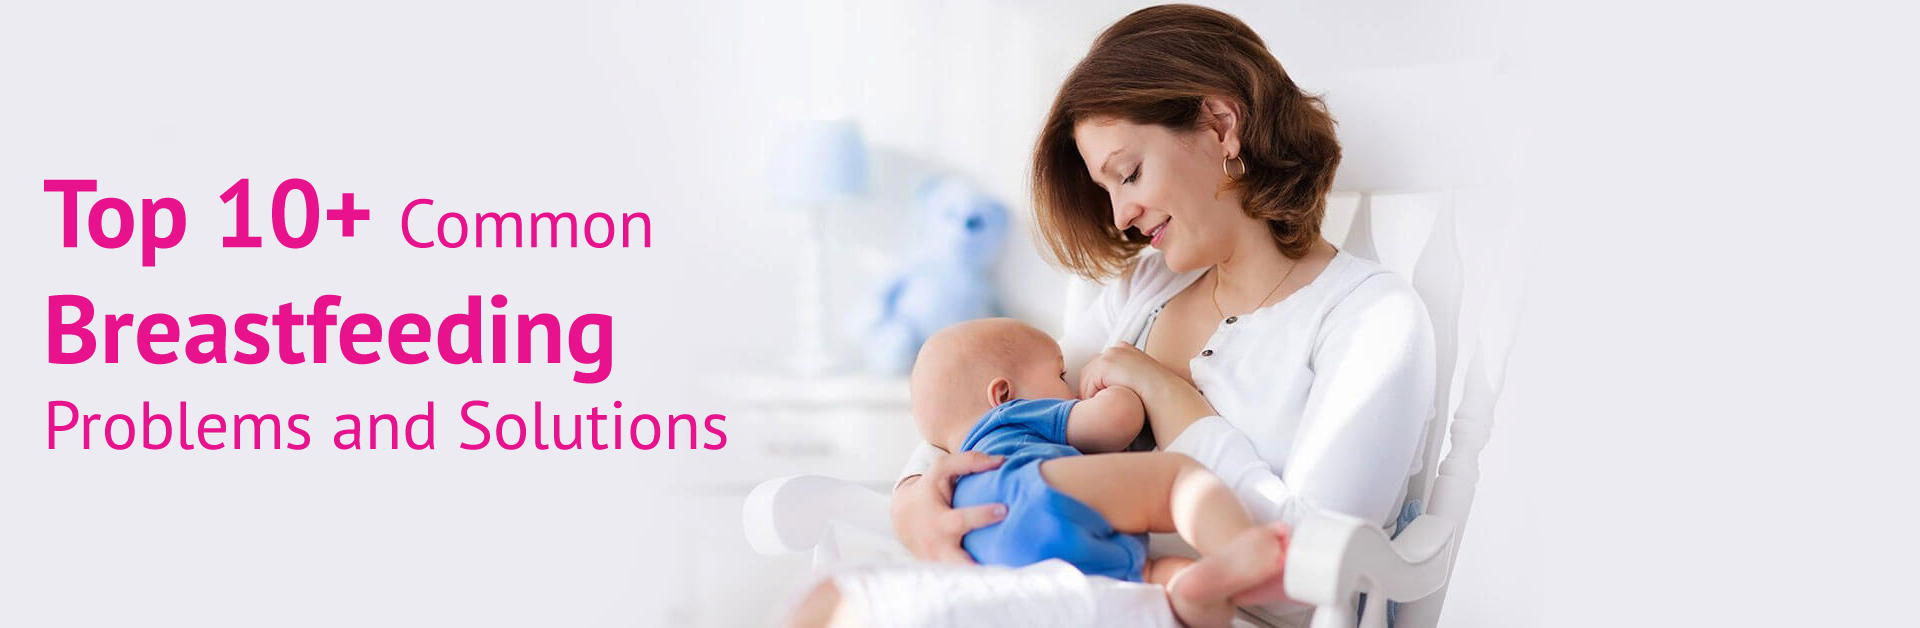 TOP 10+ COMMON BREASTFEEDING PROBLEMS AND SOLUTIONS